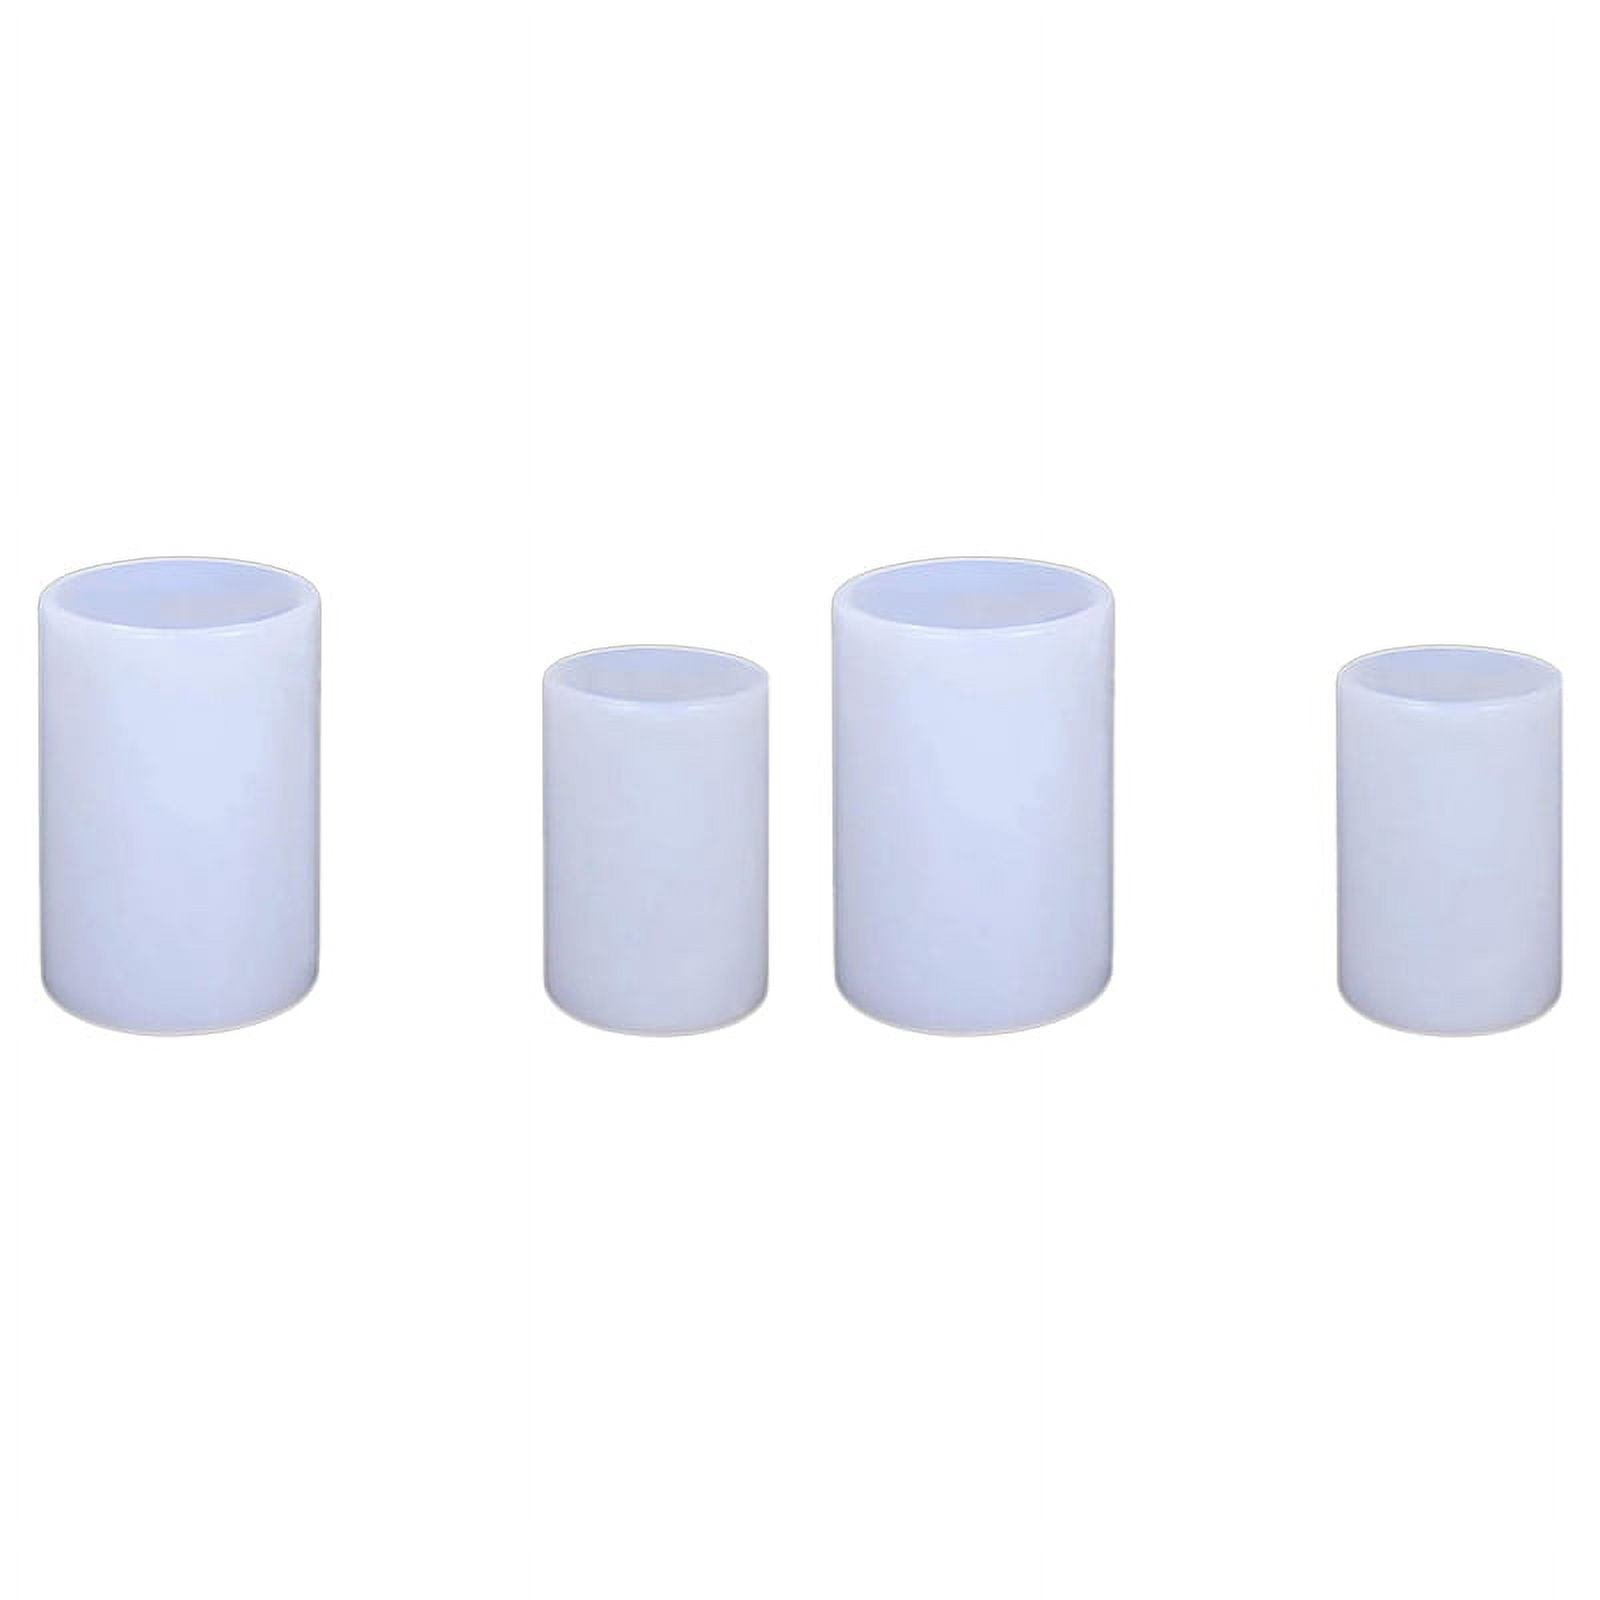 3 Sizes Cylinder Candle Mold for Candle Making, PASEO Cylindrical  Candlestick Epoxy Casting Molds, Pillar Candles Resin Mould for DIY  Aromatherapy Candles, Wax, Soaps, Polymer Clay 